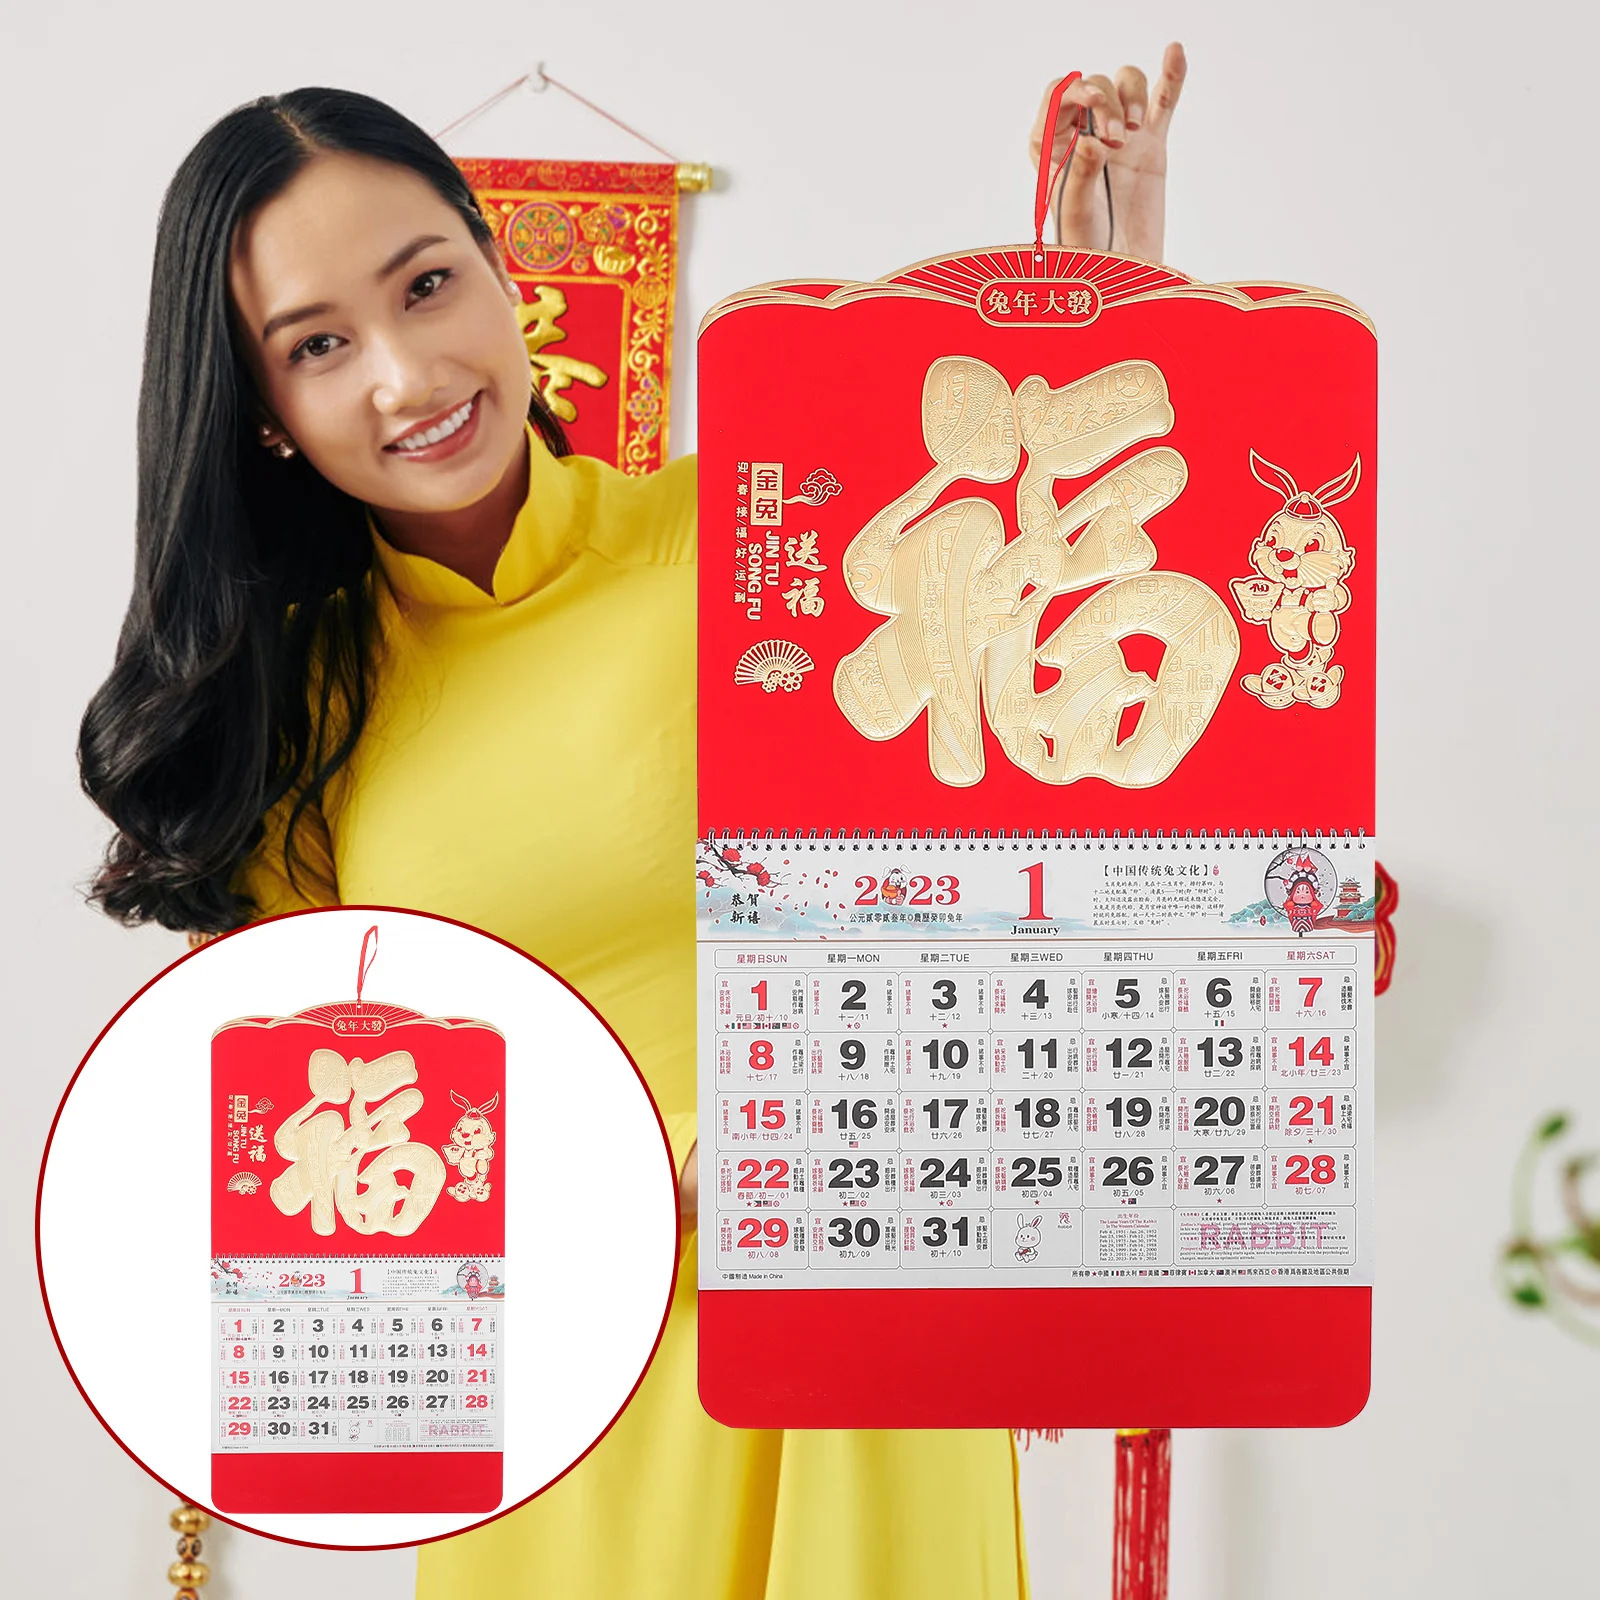 

Calendar Chinese Wall Year Lunar Rabbit Hanging Calendars Traditional New Zodiac Bunny Daily Monthly Festival Spring Years Decor